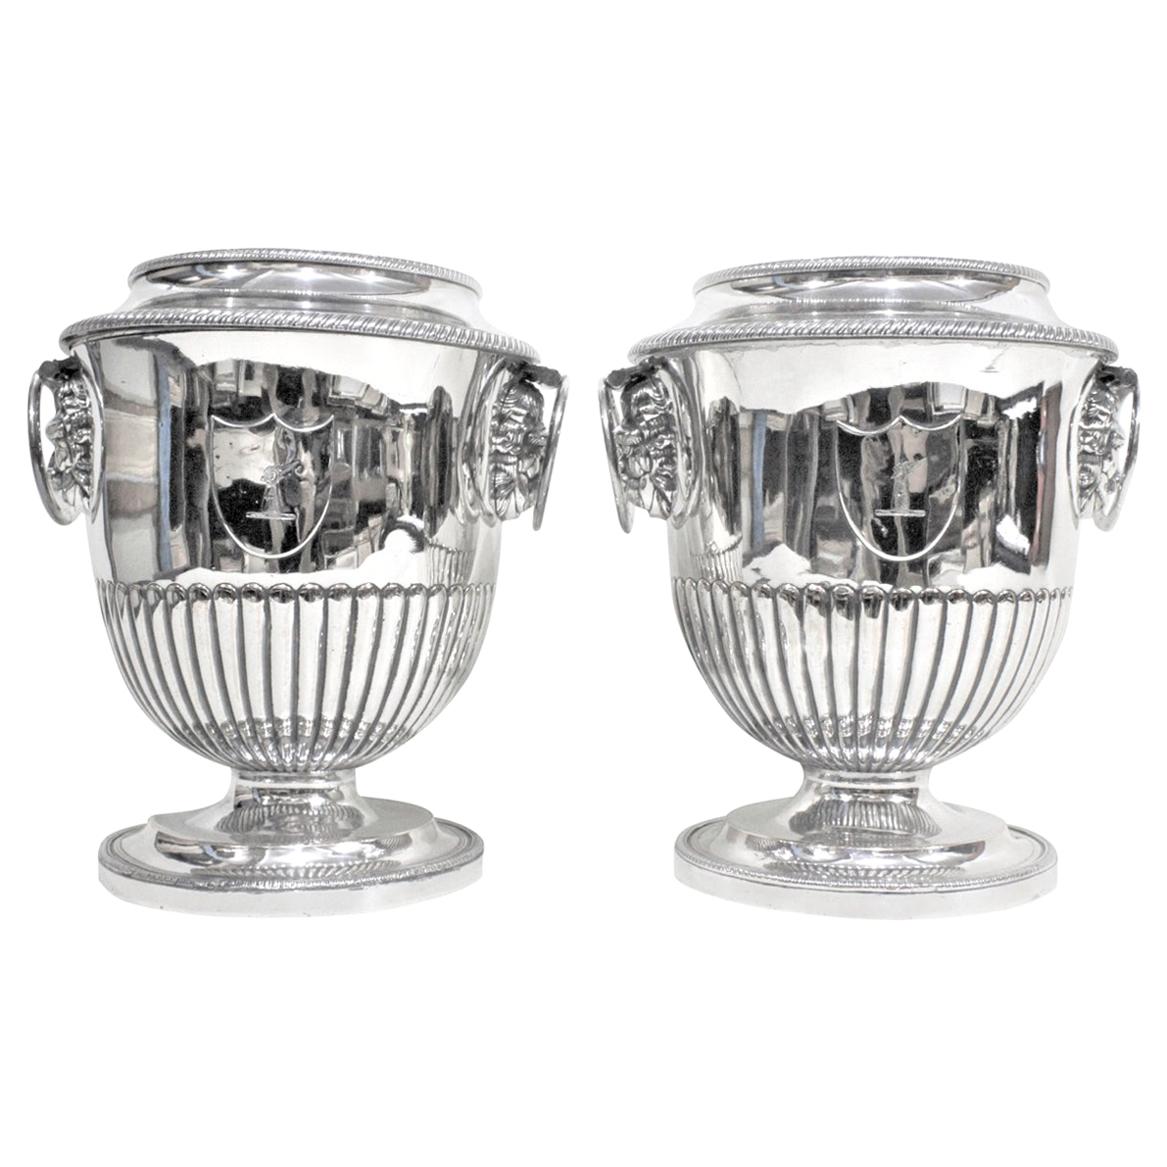 Pair of Antique Sheffield Regency Style Silver Plated Wine Coolers For Sale